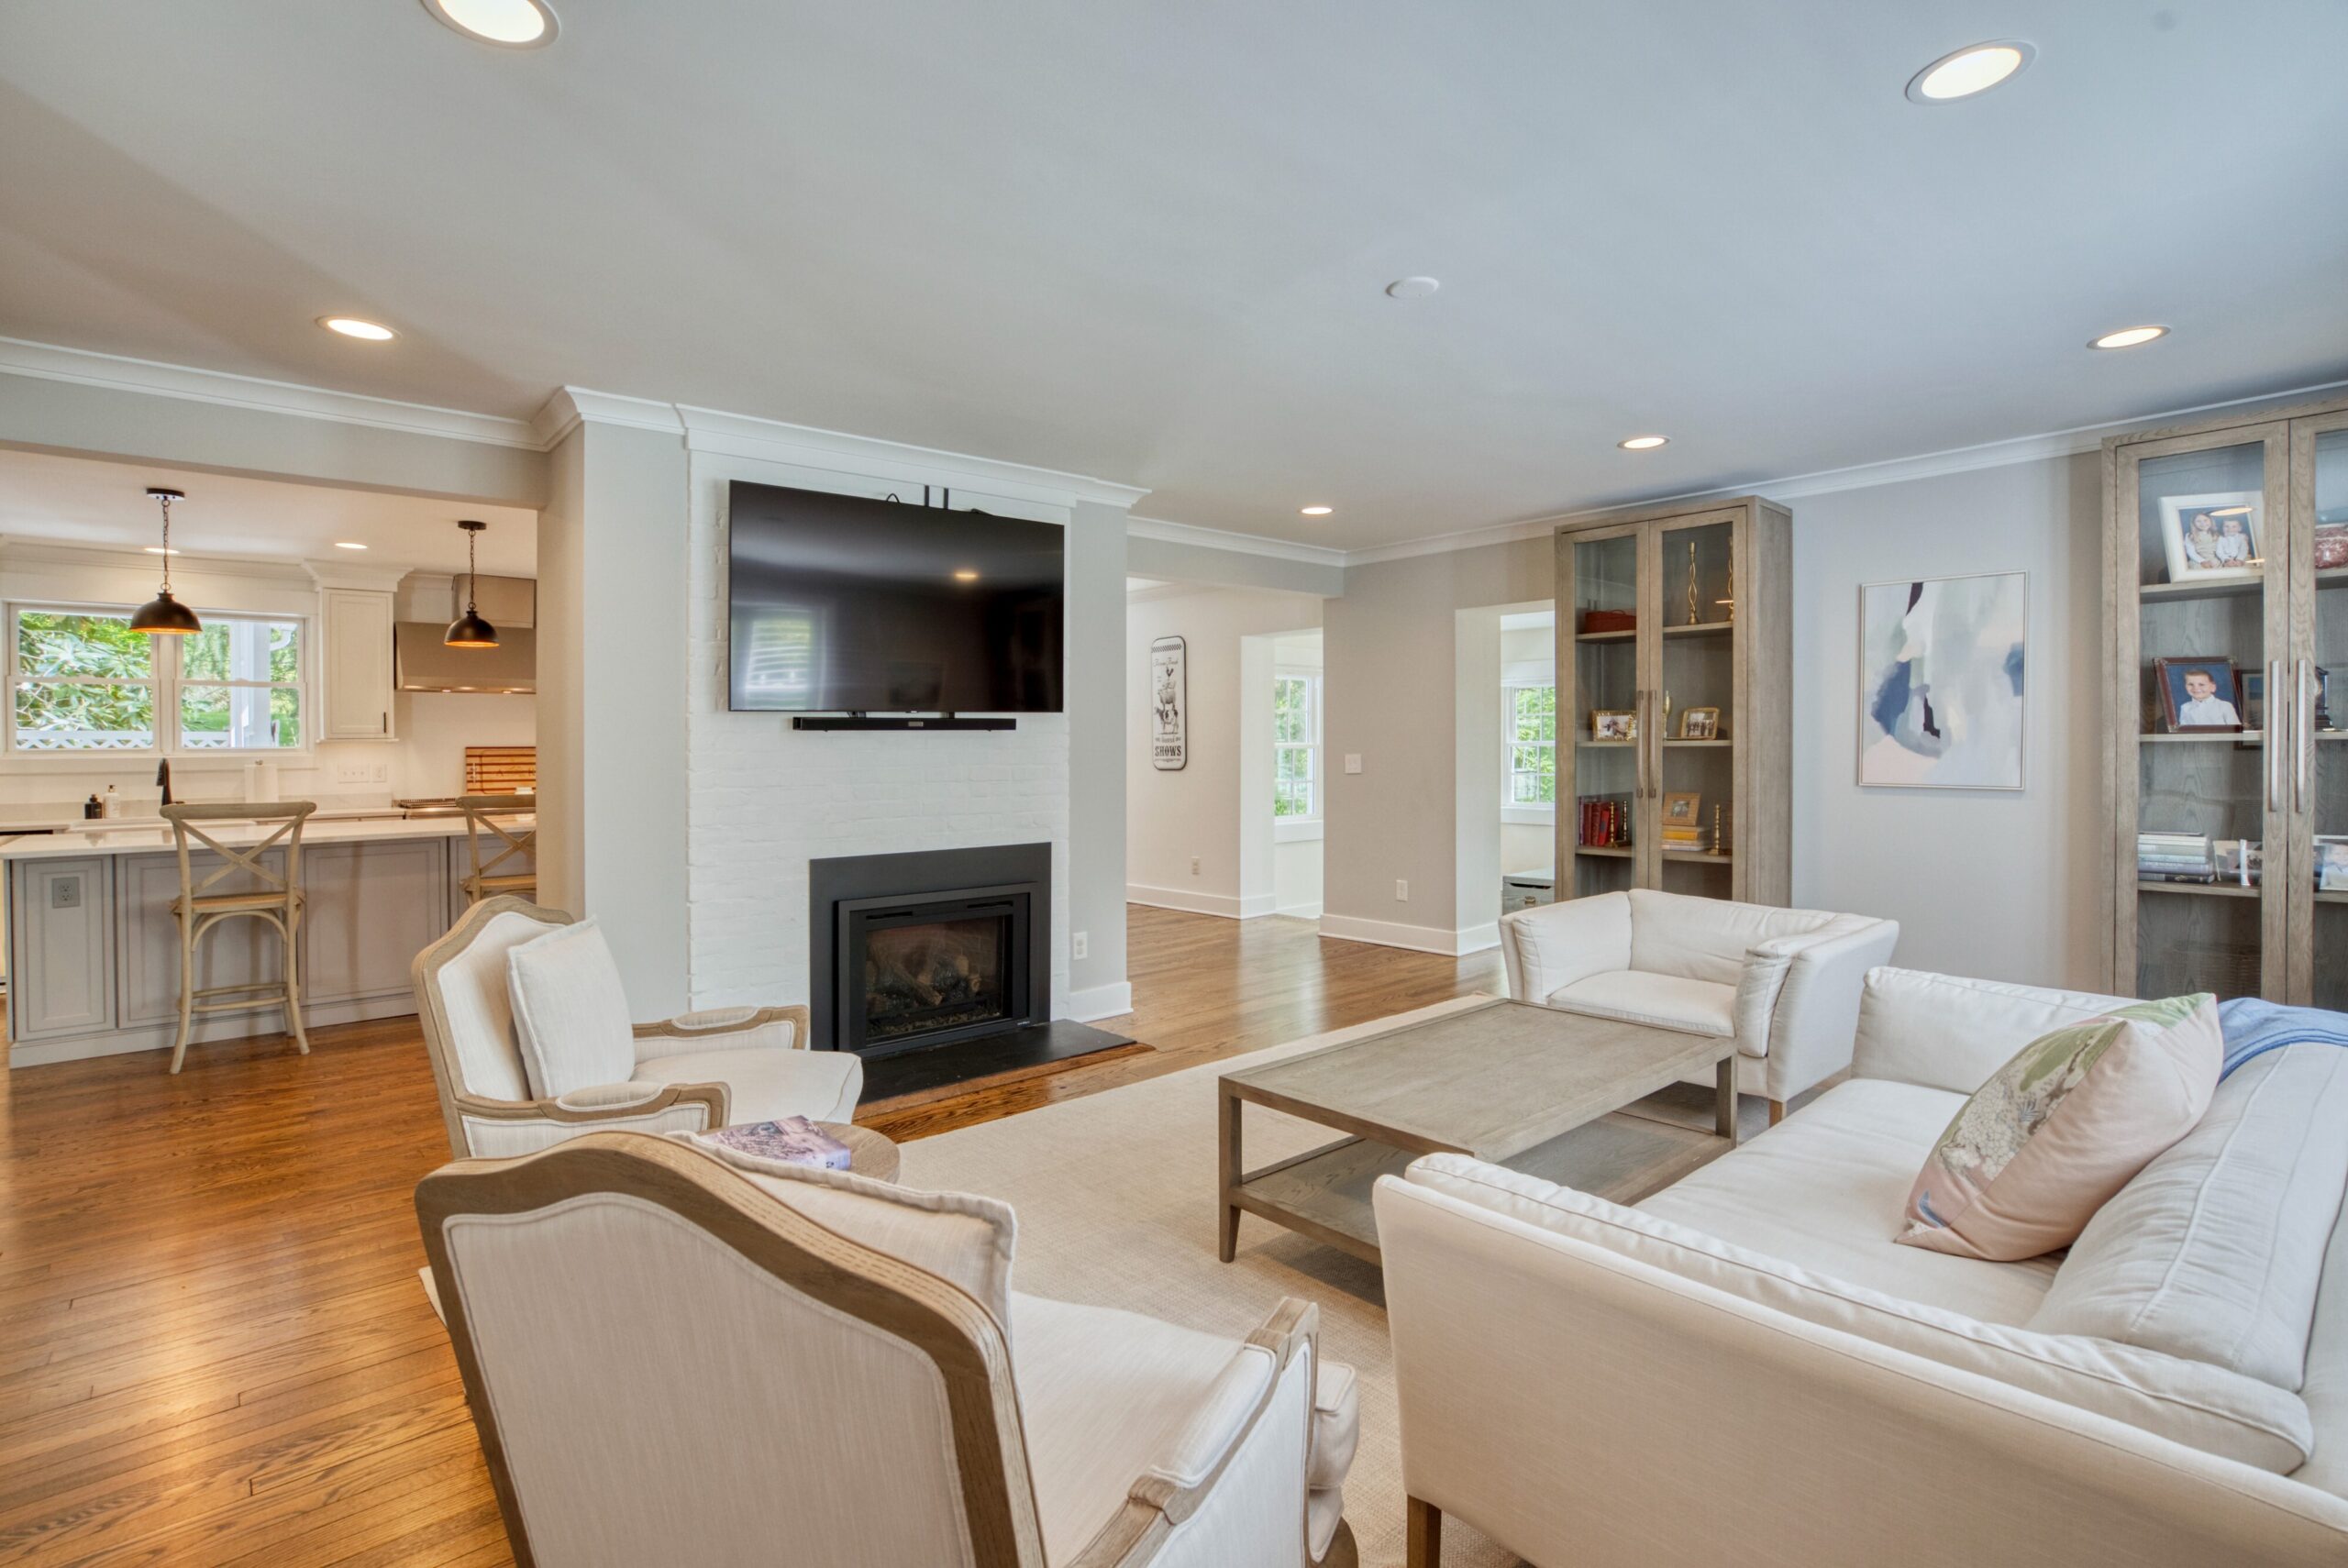 Professional interior photo of 209 Norwood Road, Annapolis, MD - showing the formal living room with fireplace and mounted TV on a wide pillar that flows into the kitchen visible beyond